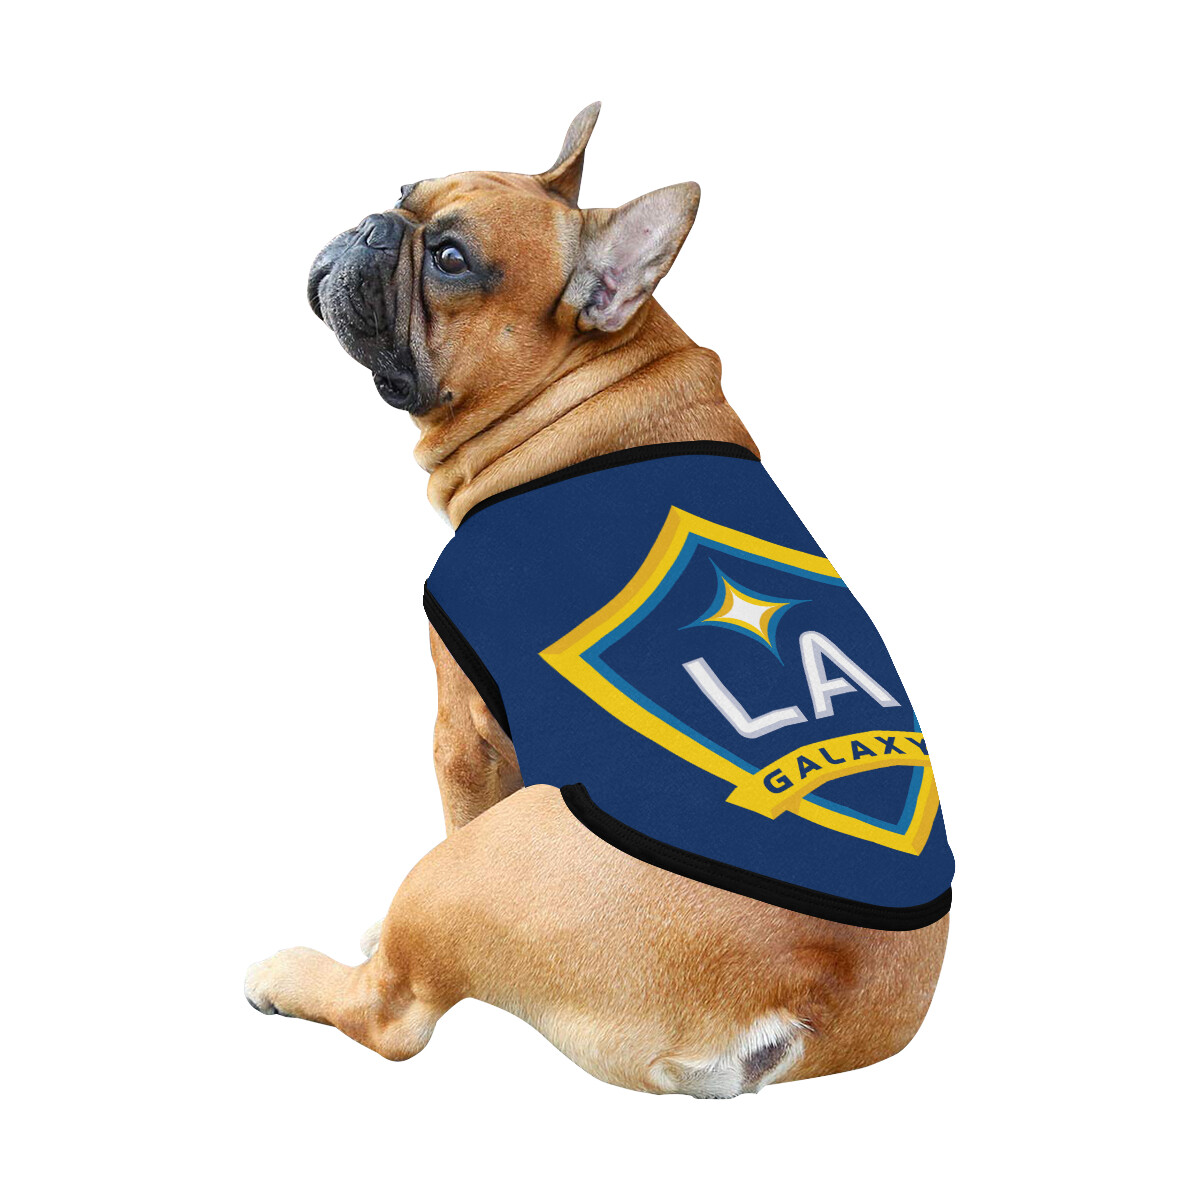 🐕 Los Angeles Galaxy Dog shirt, Dog Tank Top, Dog t-shirt, Dog clothes, Gifts, front back print, 7 sizes XS to 3XL, dog gifts, blue